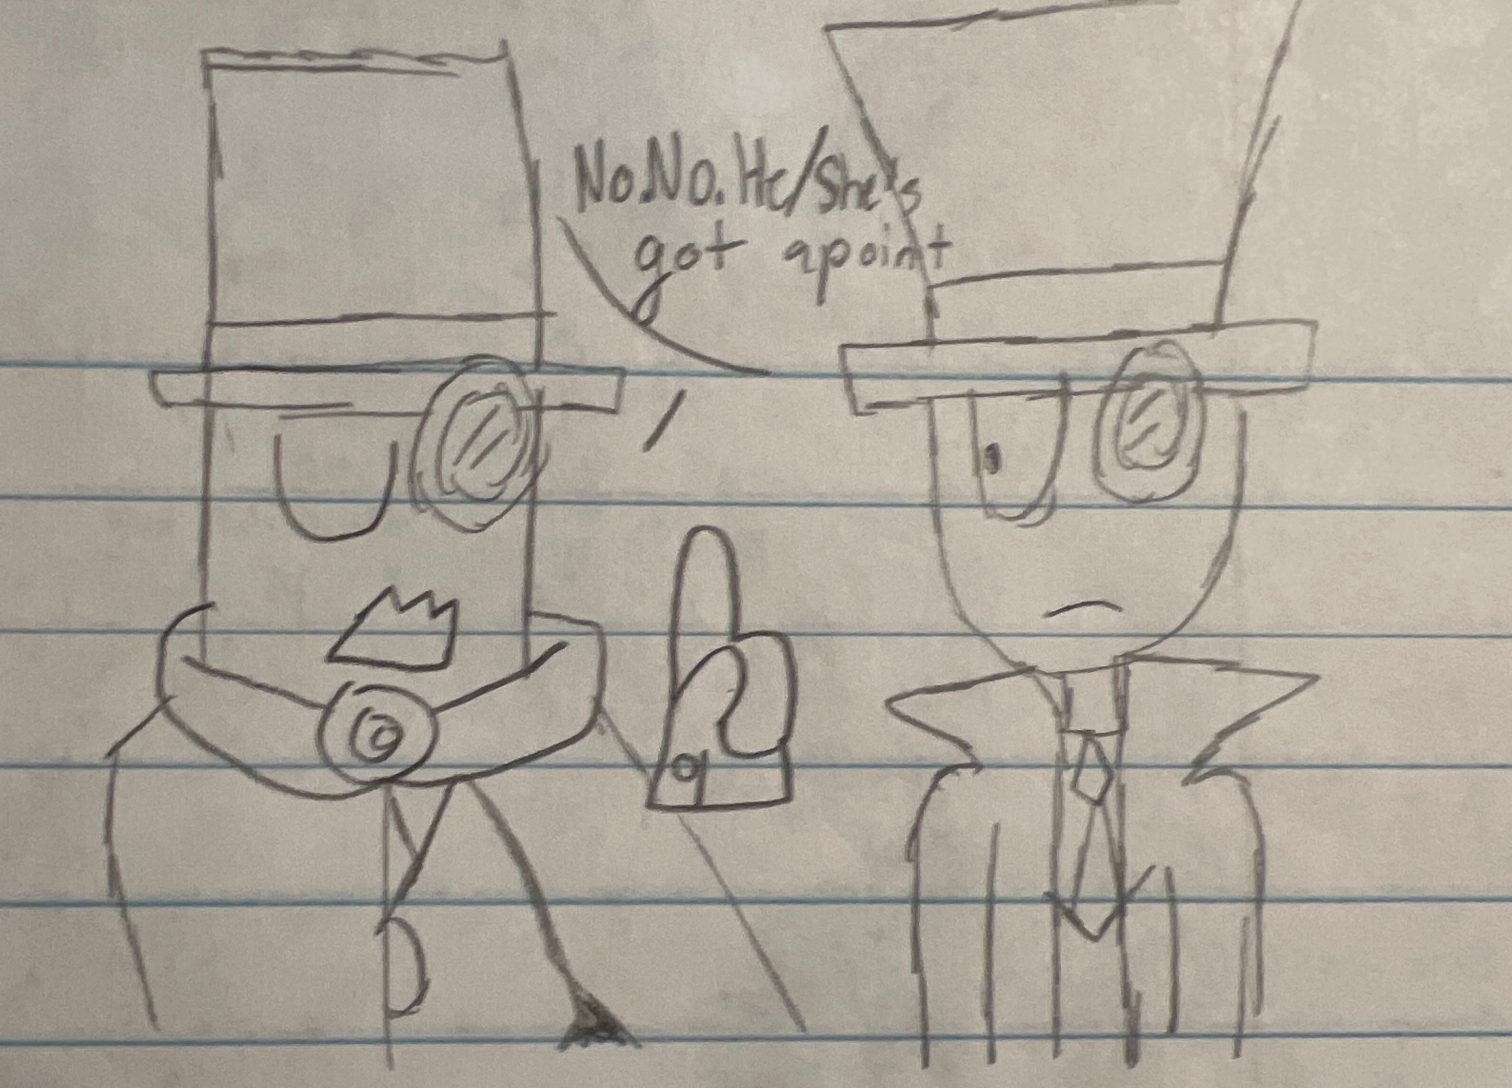 Count Bleck with Black Hat No No he/she’s got a point Blank Meme Template